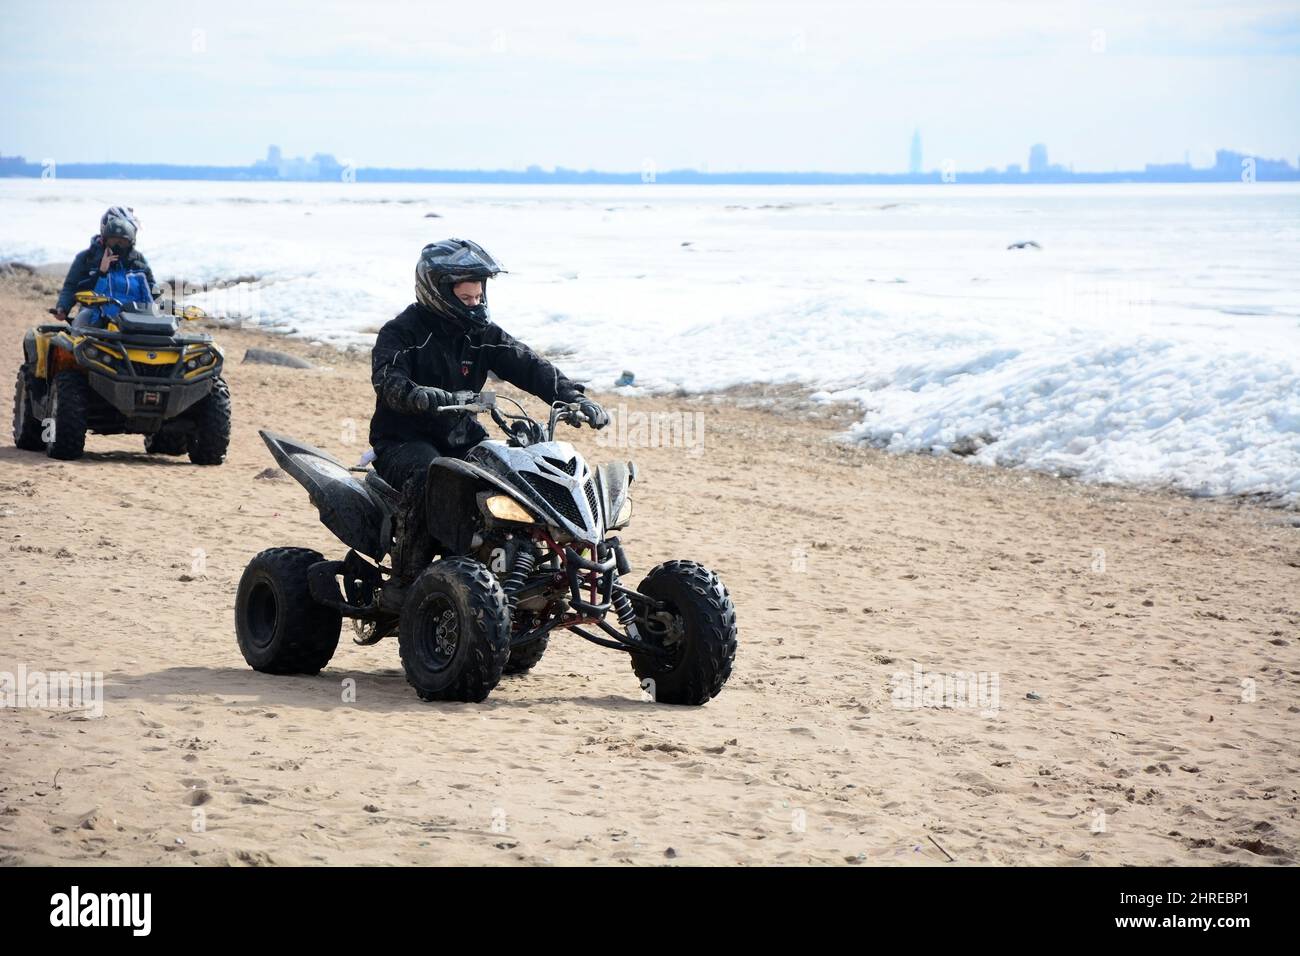 ZELENOGORSK, RUSSIA- APRIL 09, 2017: Two men ride quadcopters across the sand along the frozen Gulf of Finland. Russia, St. Petersburg, spring Stock Photo